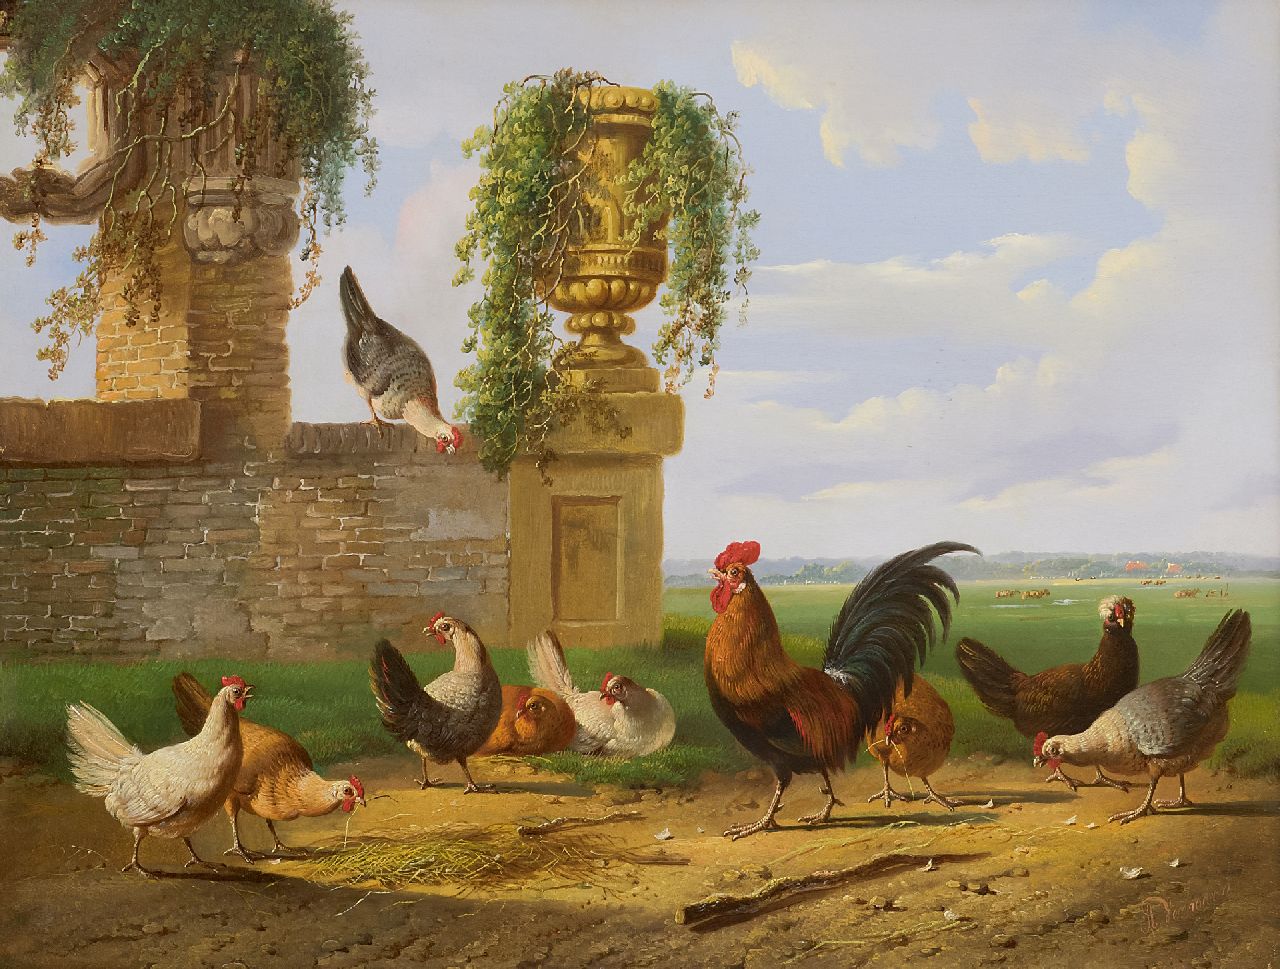 Verhoesen A.  | Albertus Verhoesen | Paintings offered for sale | Poultry in a Dutch landscape, oil on panel 39.2 x 51.1 cm, signed l.r.